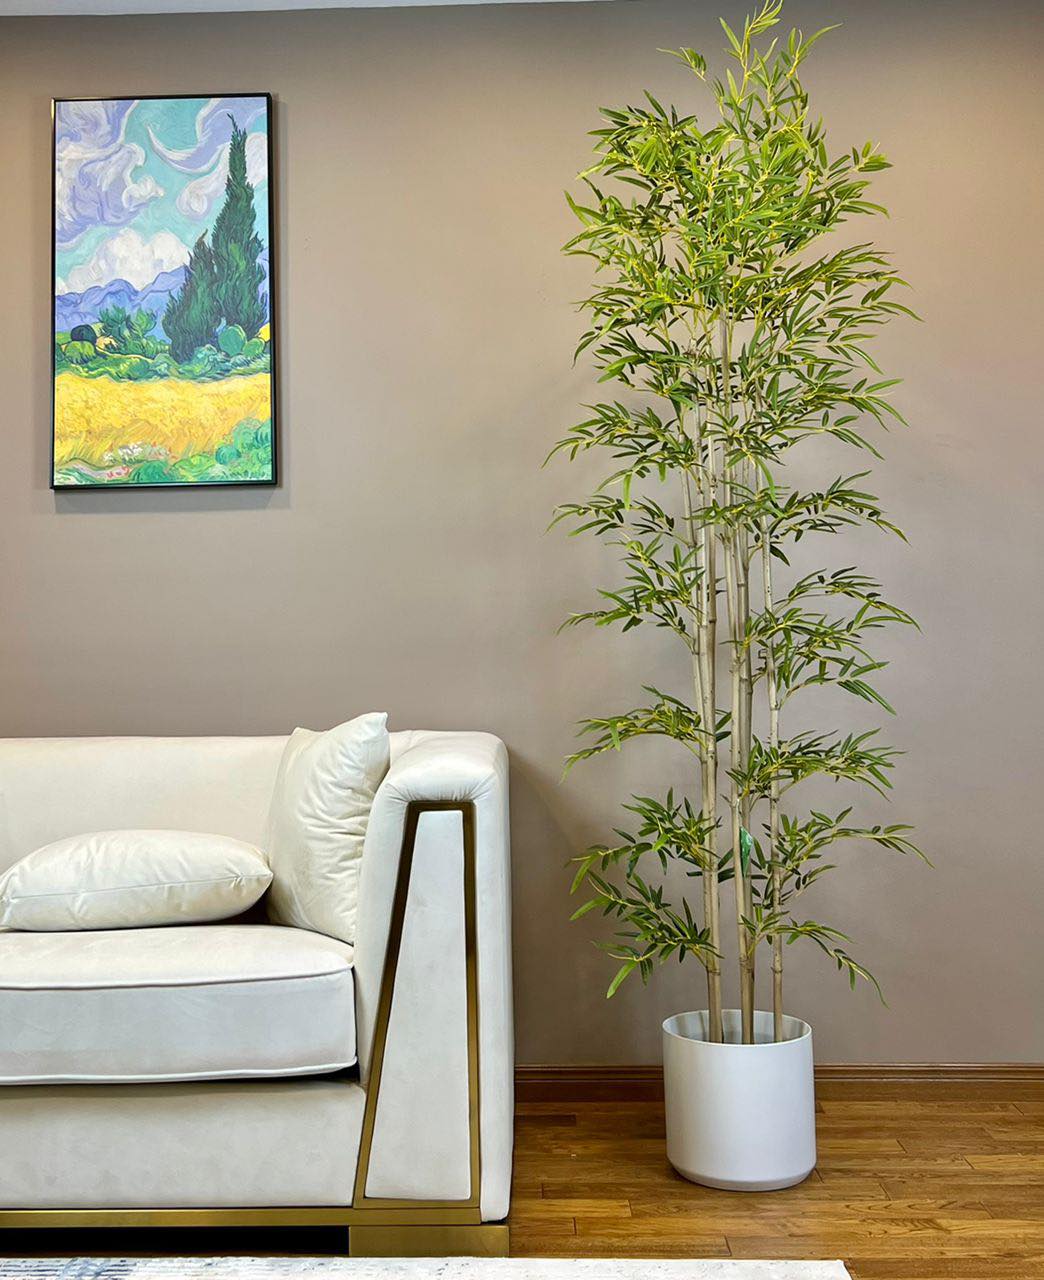 A 7 ft tall Artificial Bamboo Tree